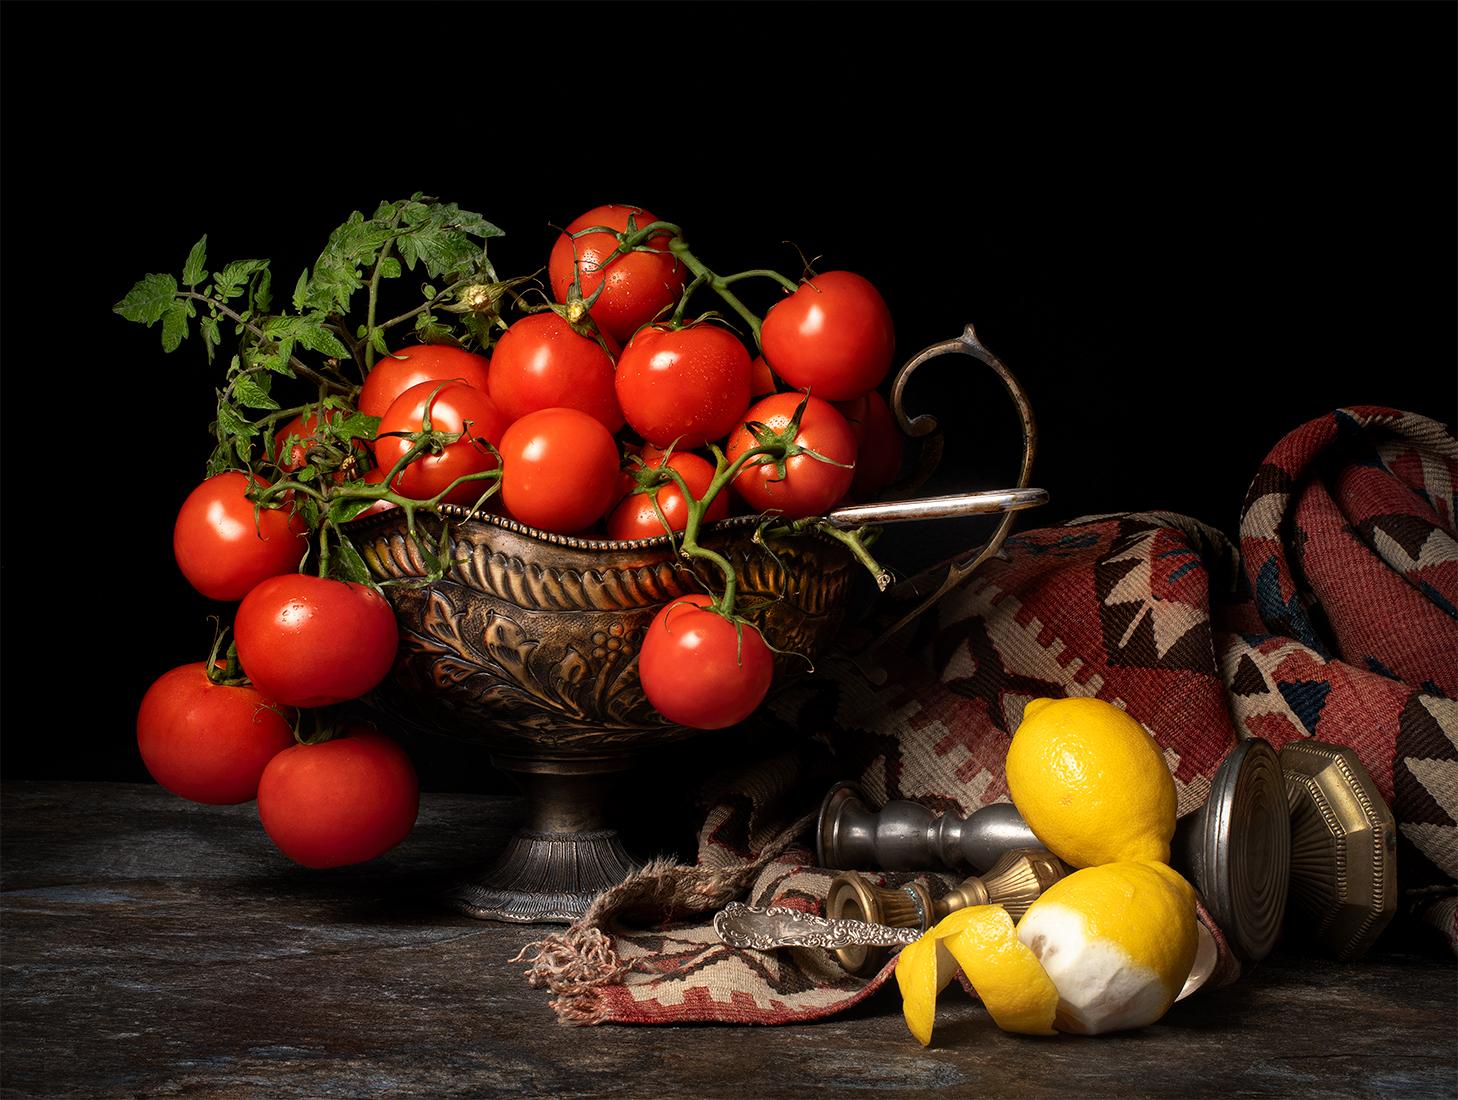 Dora Franco Color Photograph - Tomates con Limones. From the Bodegones still life color photography  series